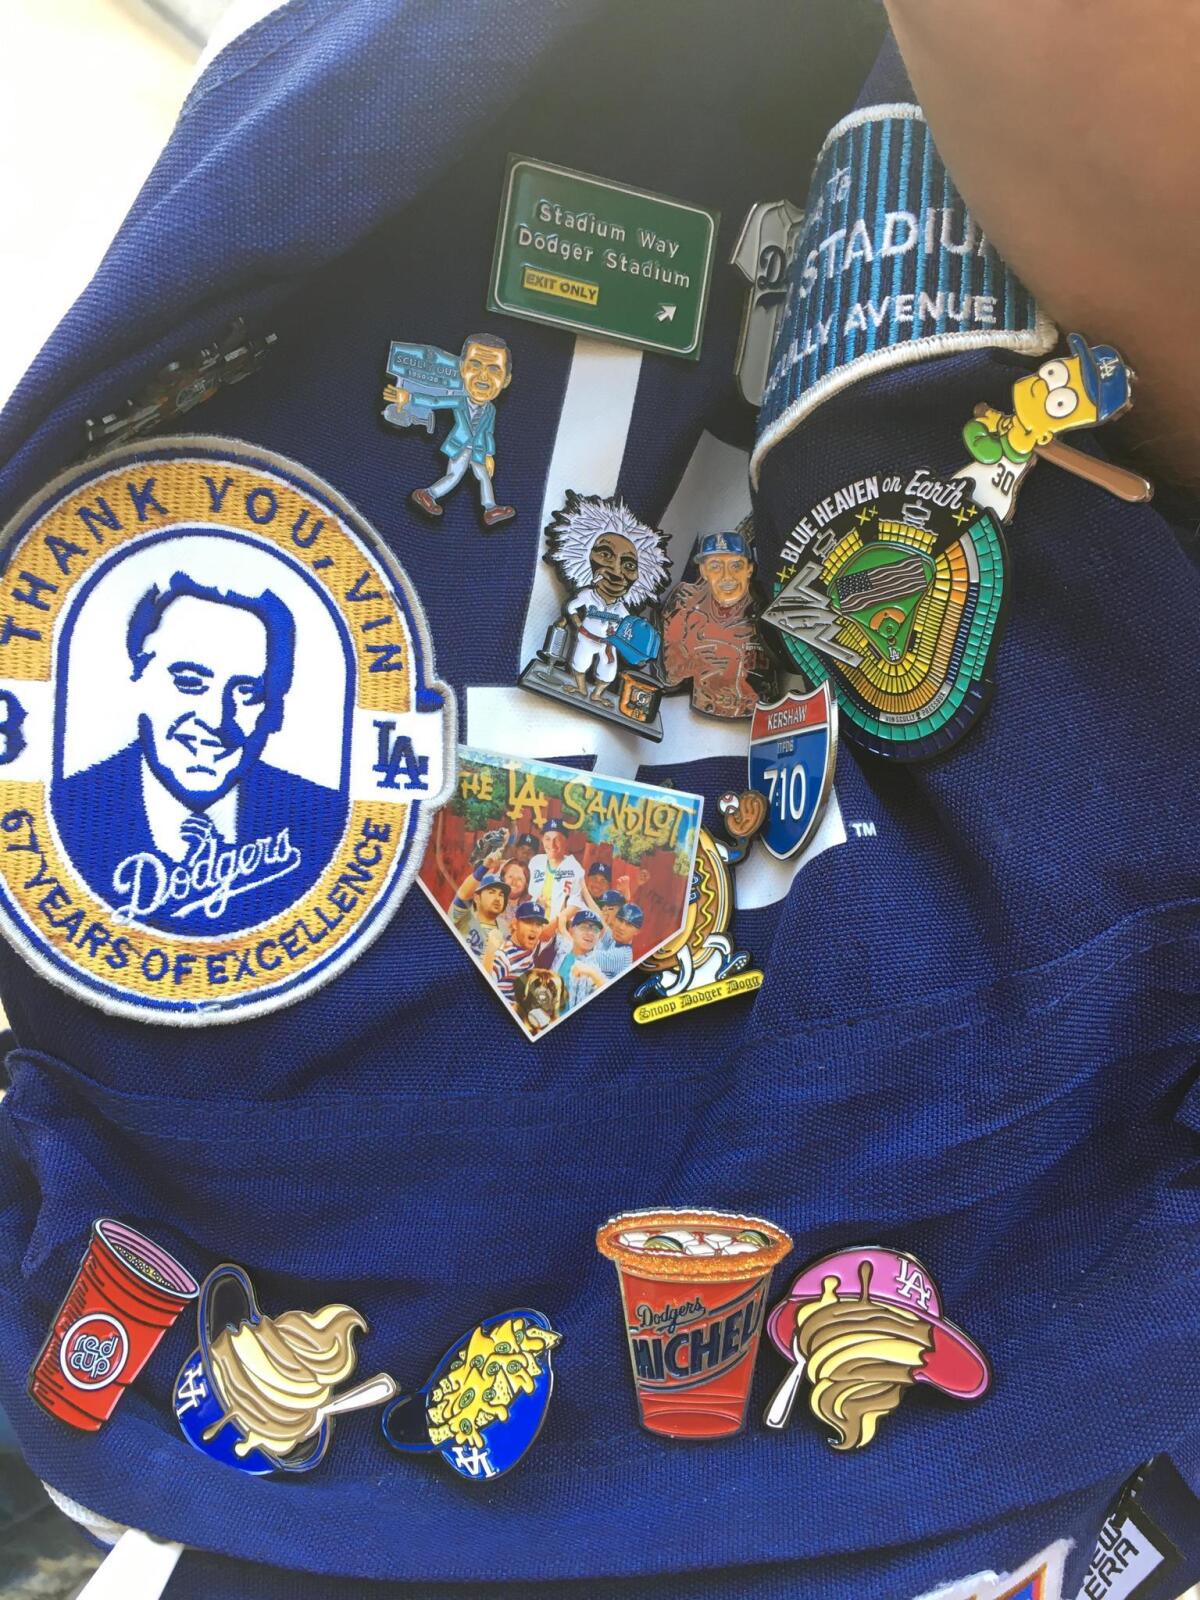 Richard Lomeli and some of the pins he designed.